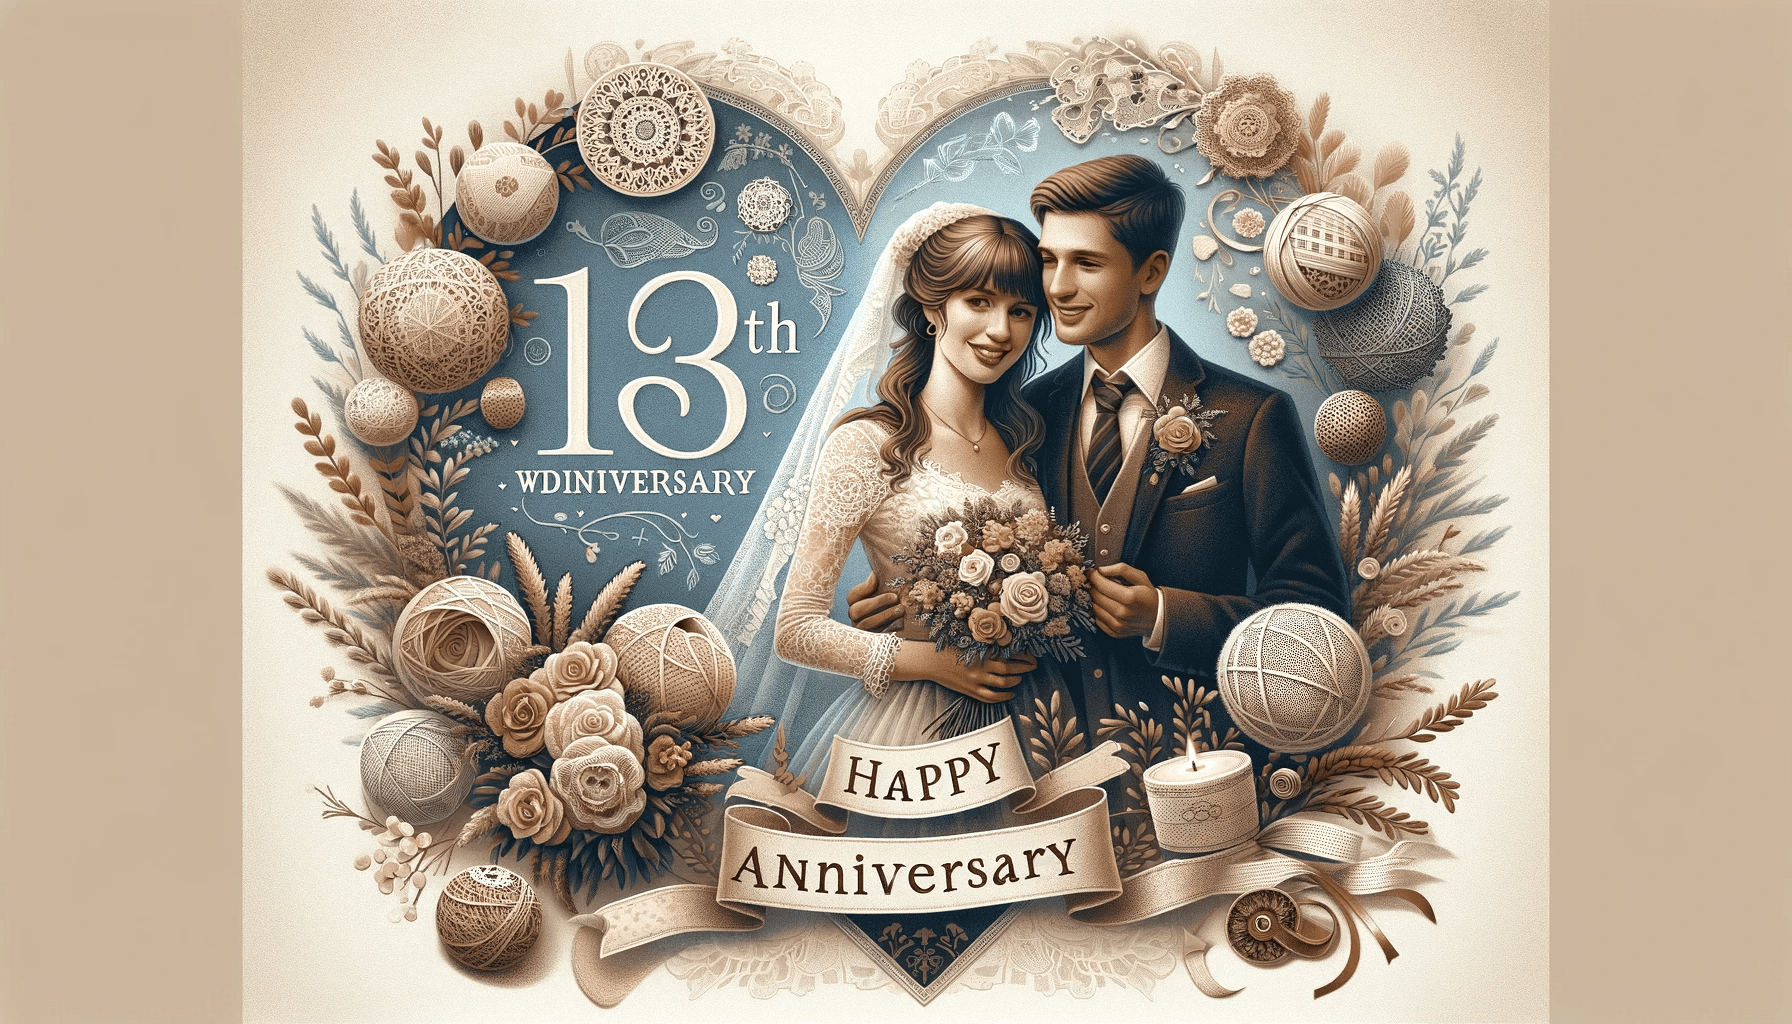 An image representing the 13th wedding anniversary. The image should reflect a sense of celebration and love, incorporating elements related to the tradition.